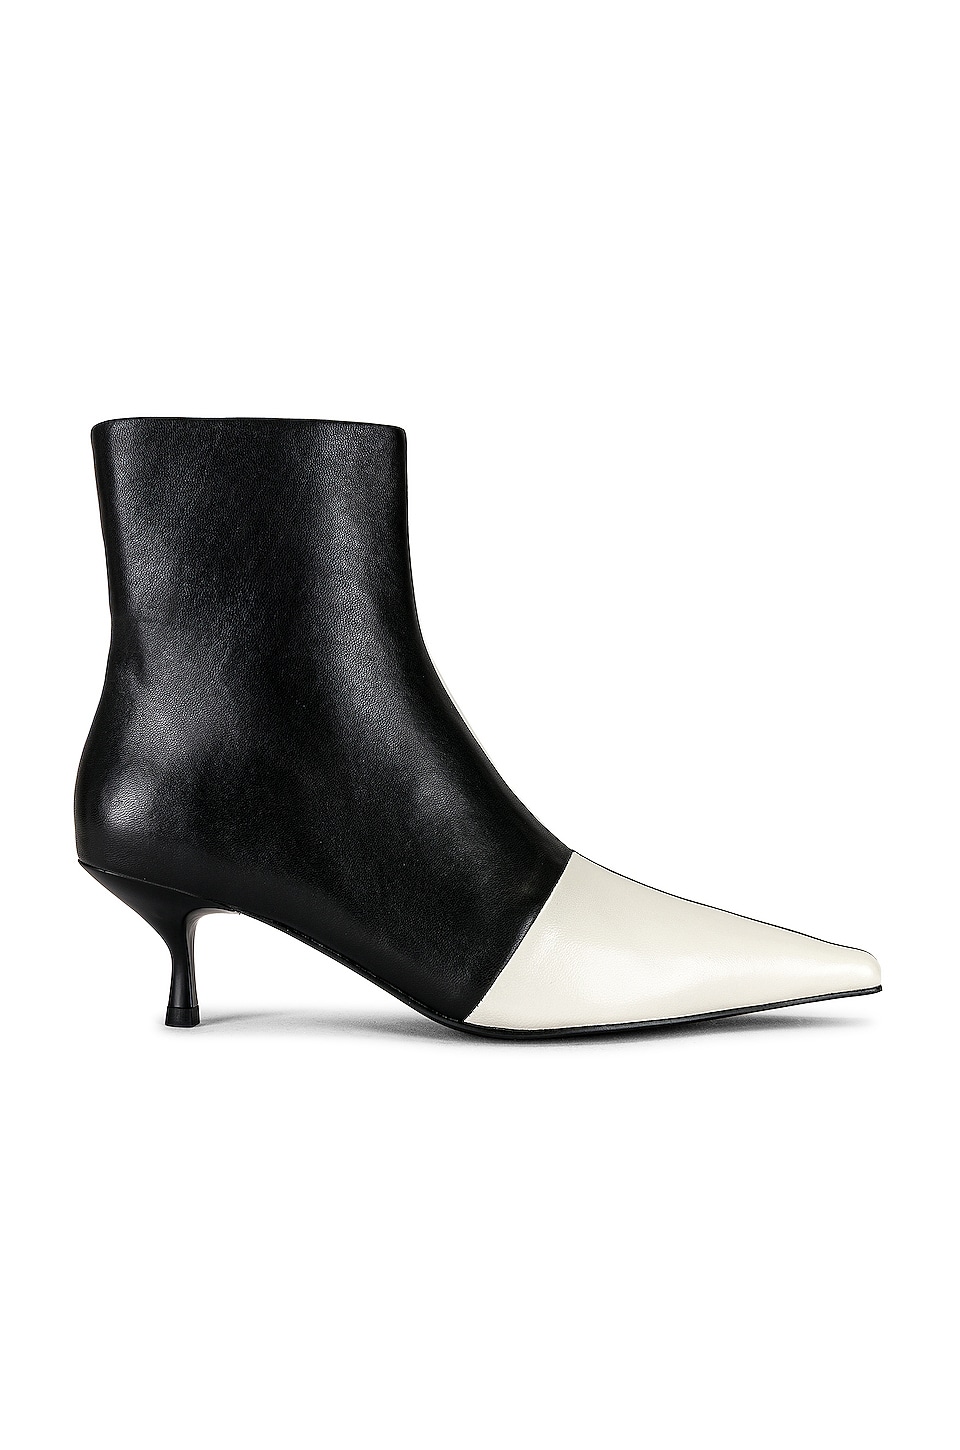 Shop the 32 Most Comfortable Kitten-Heel Boots Now | Who What Wear